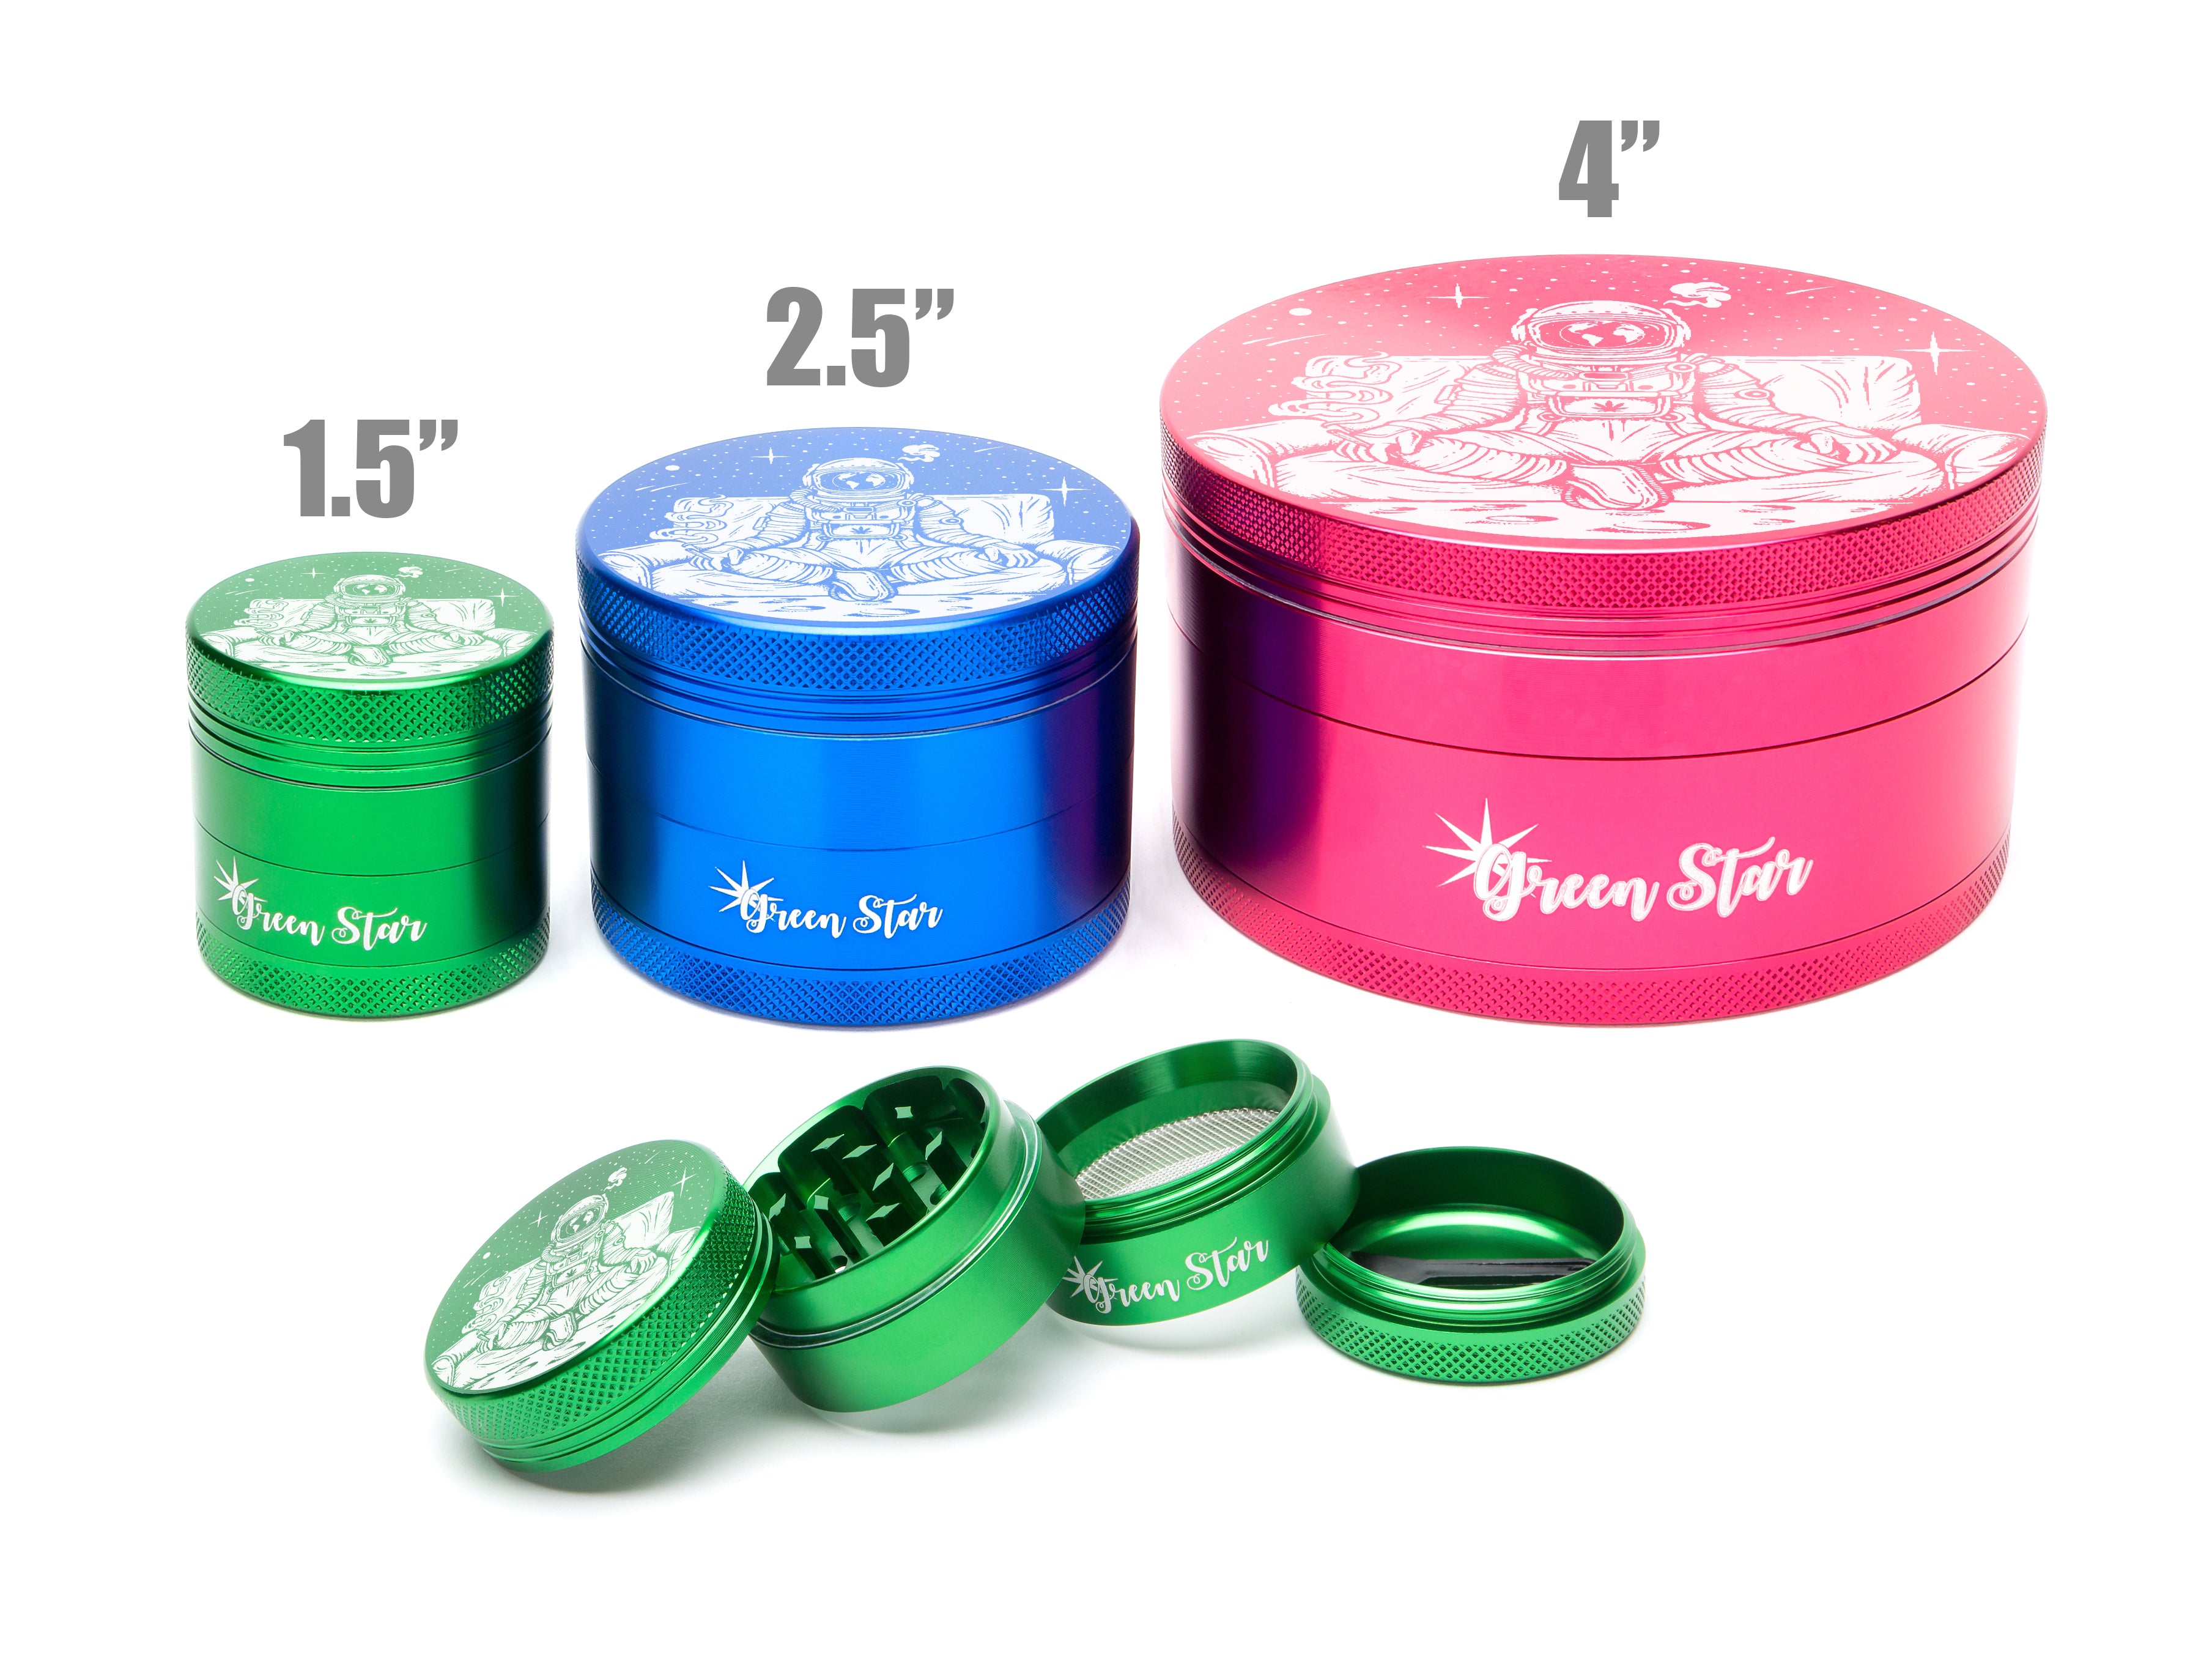 1.5" (40mm) 4-Piece Grinder with Astronaut Chillin' on the Moon Design